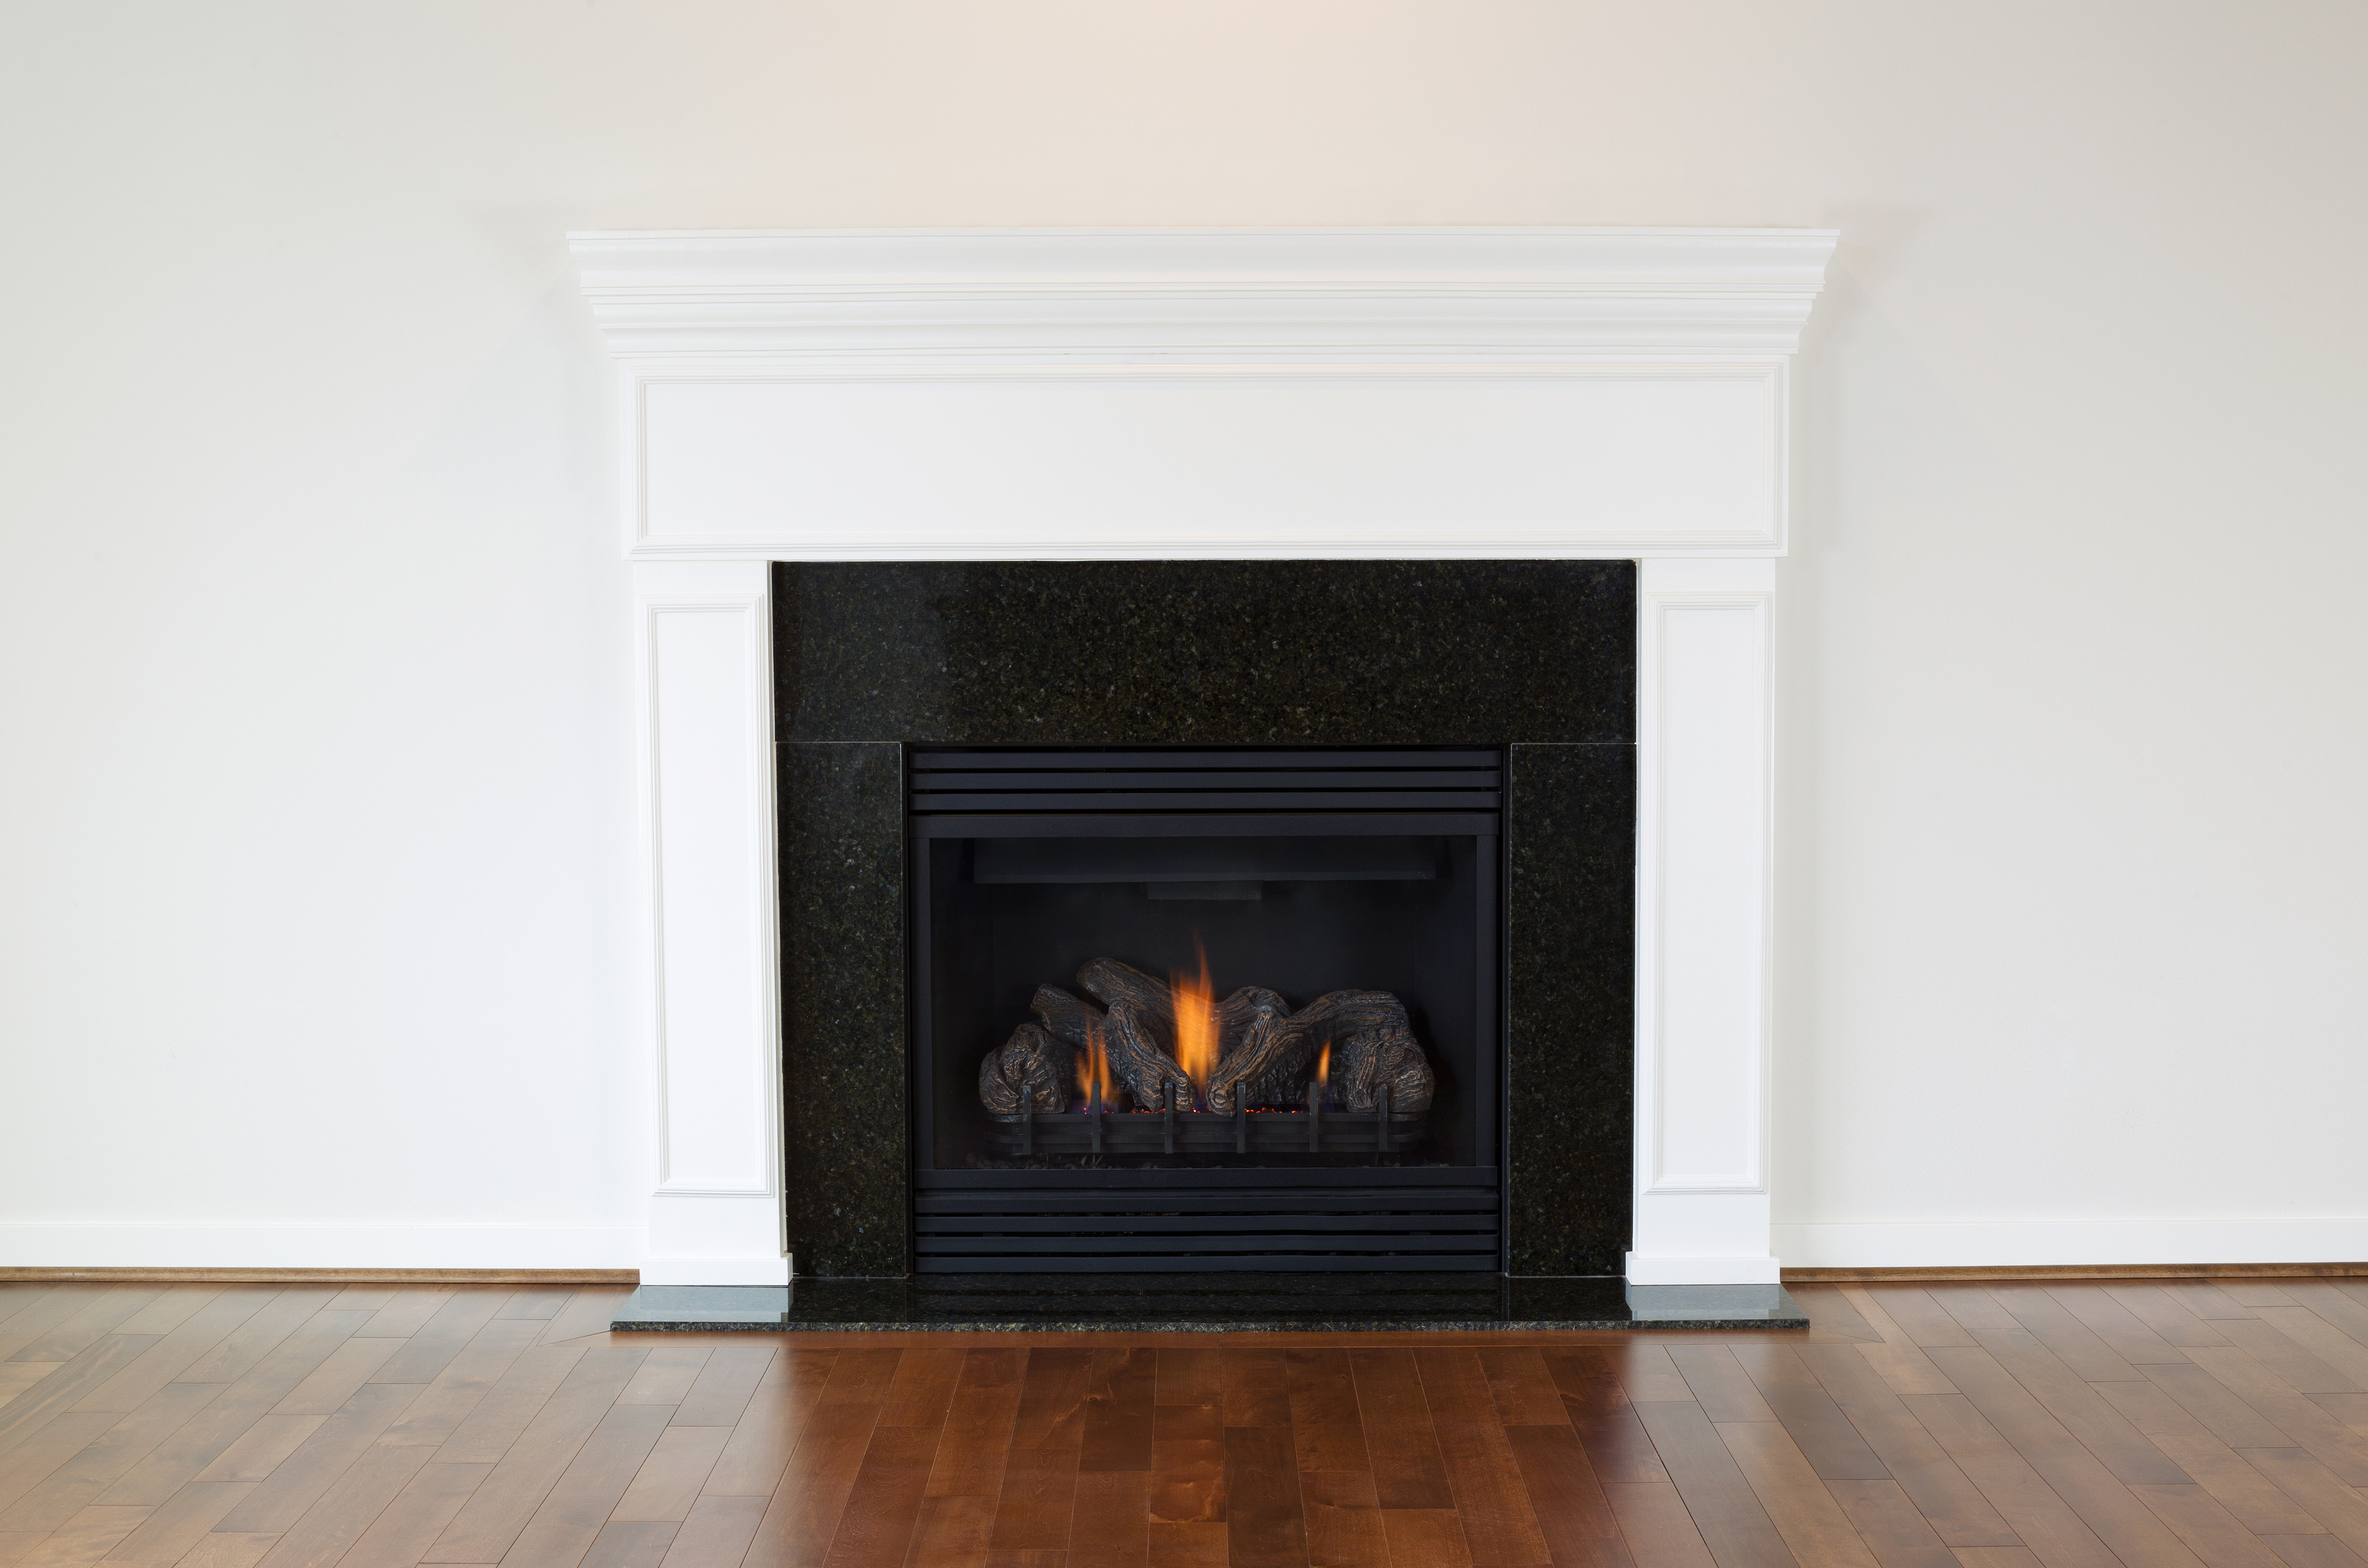 REPLACEMENT OPTIONS FOR PREFAB METAL WOOD BURNING FIREPLACES